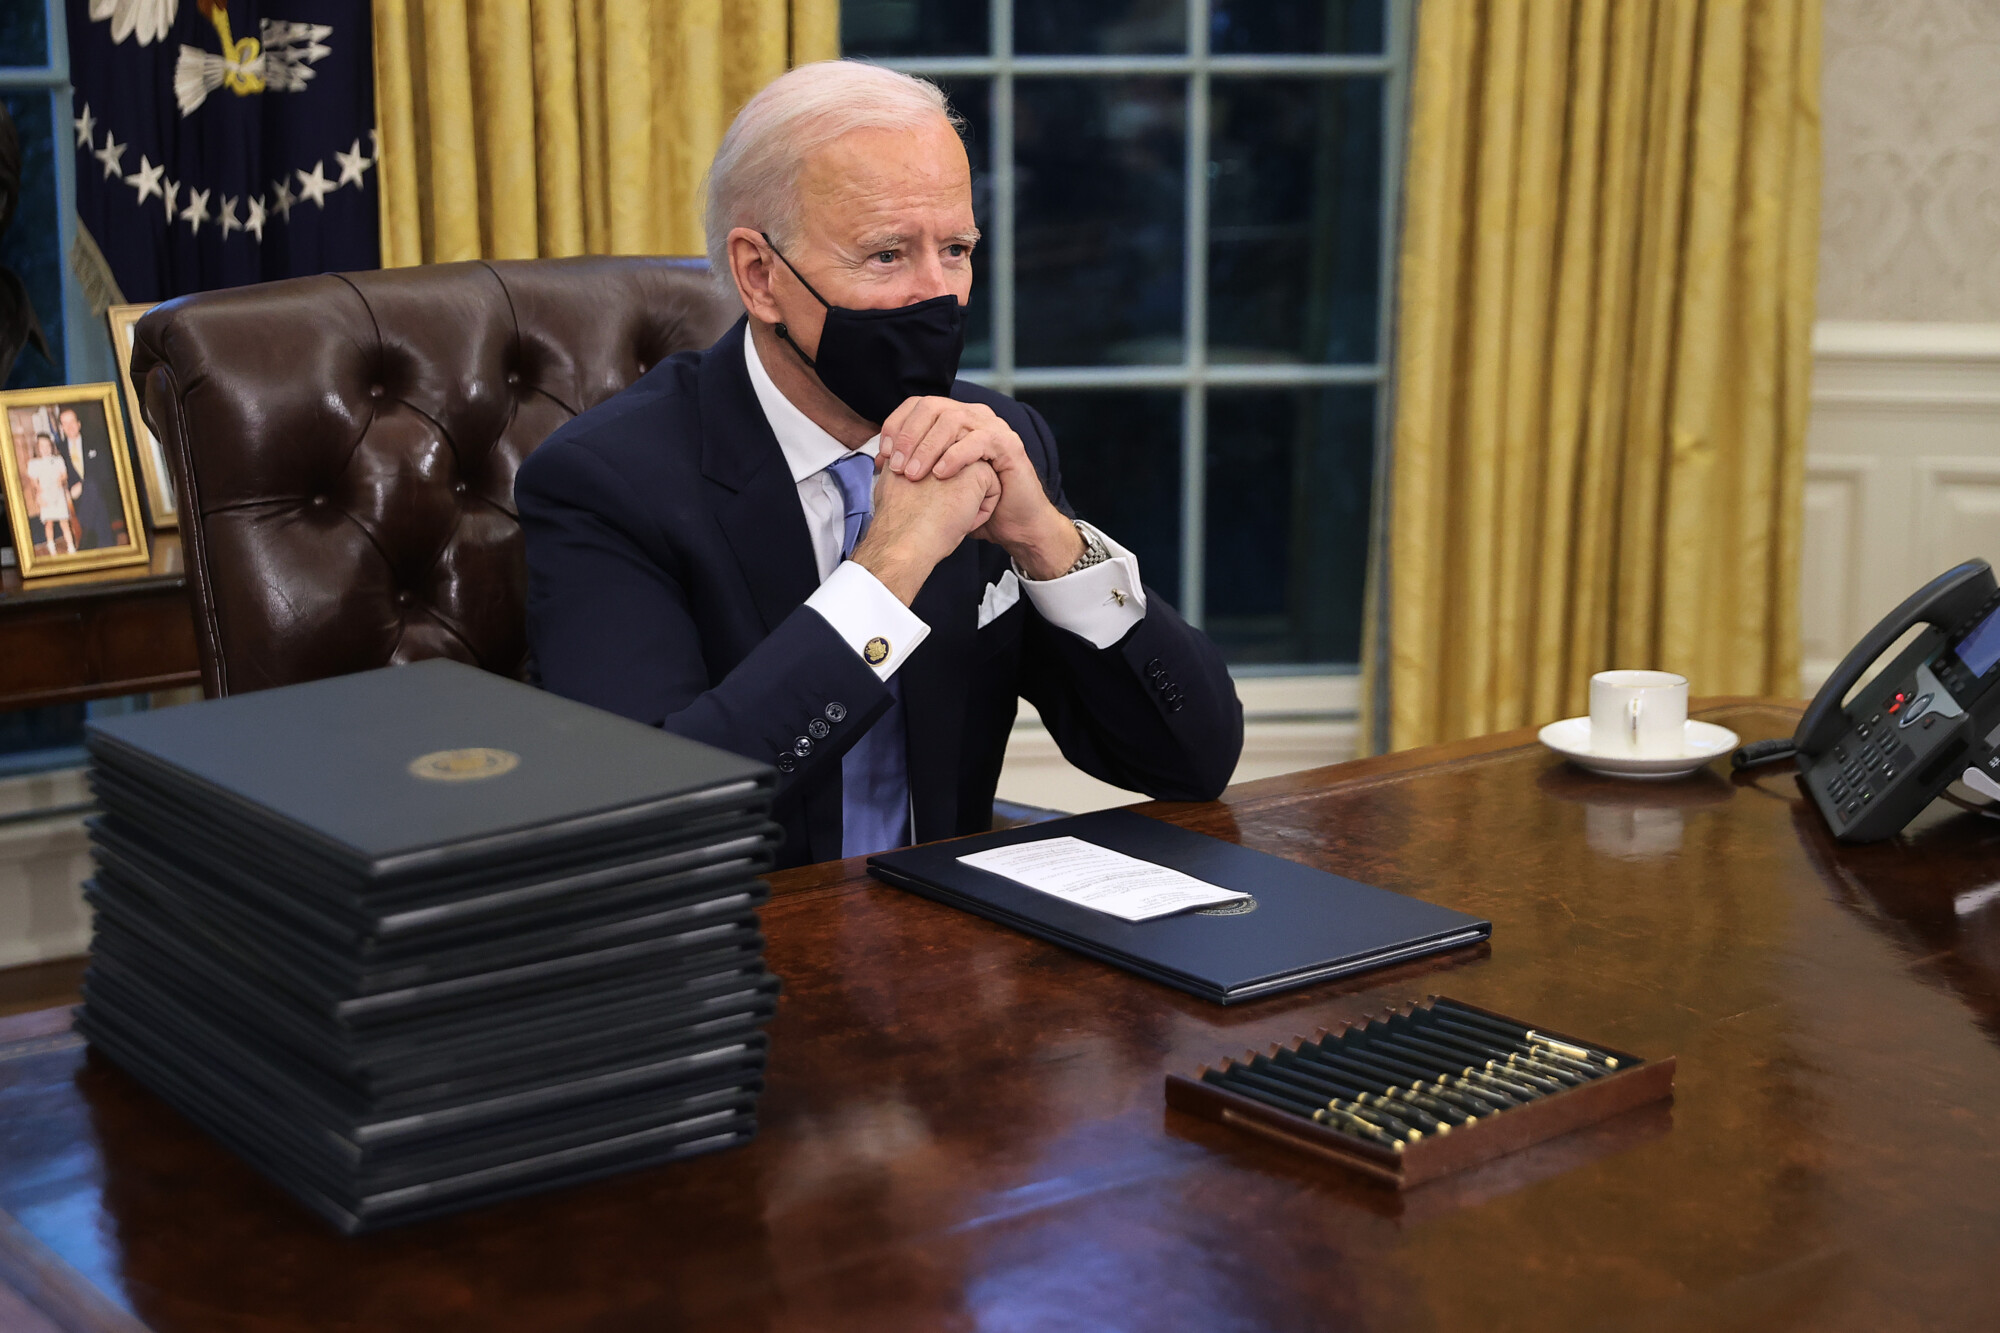 Biden Admin Embraces ‘Racial Equity’ Ideology in Slew of Executive Action Announcements